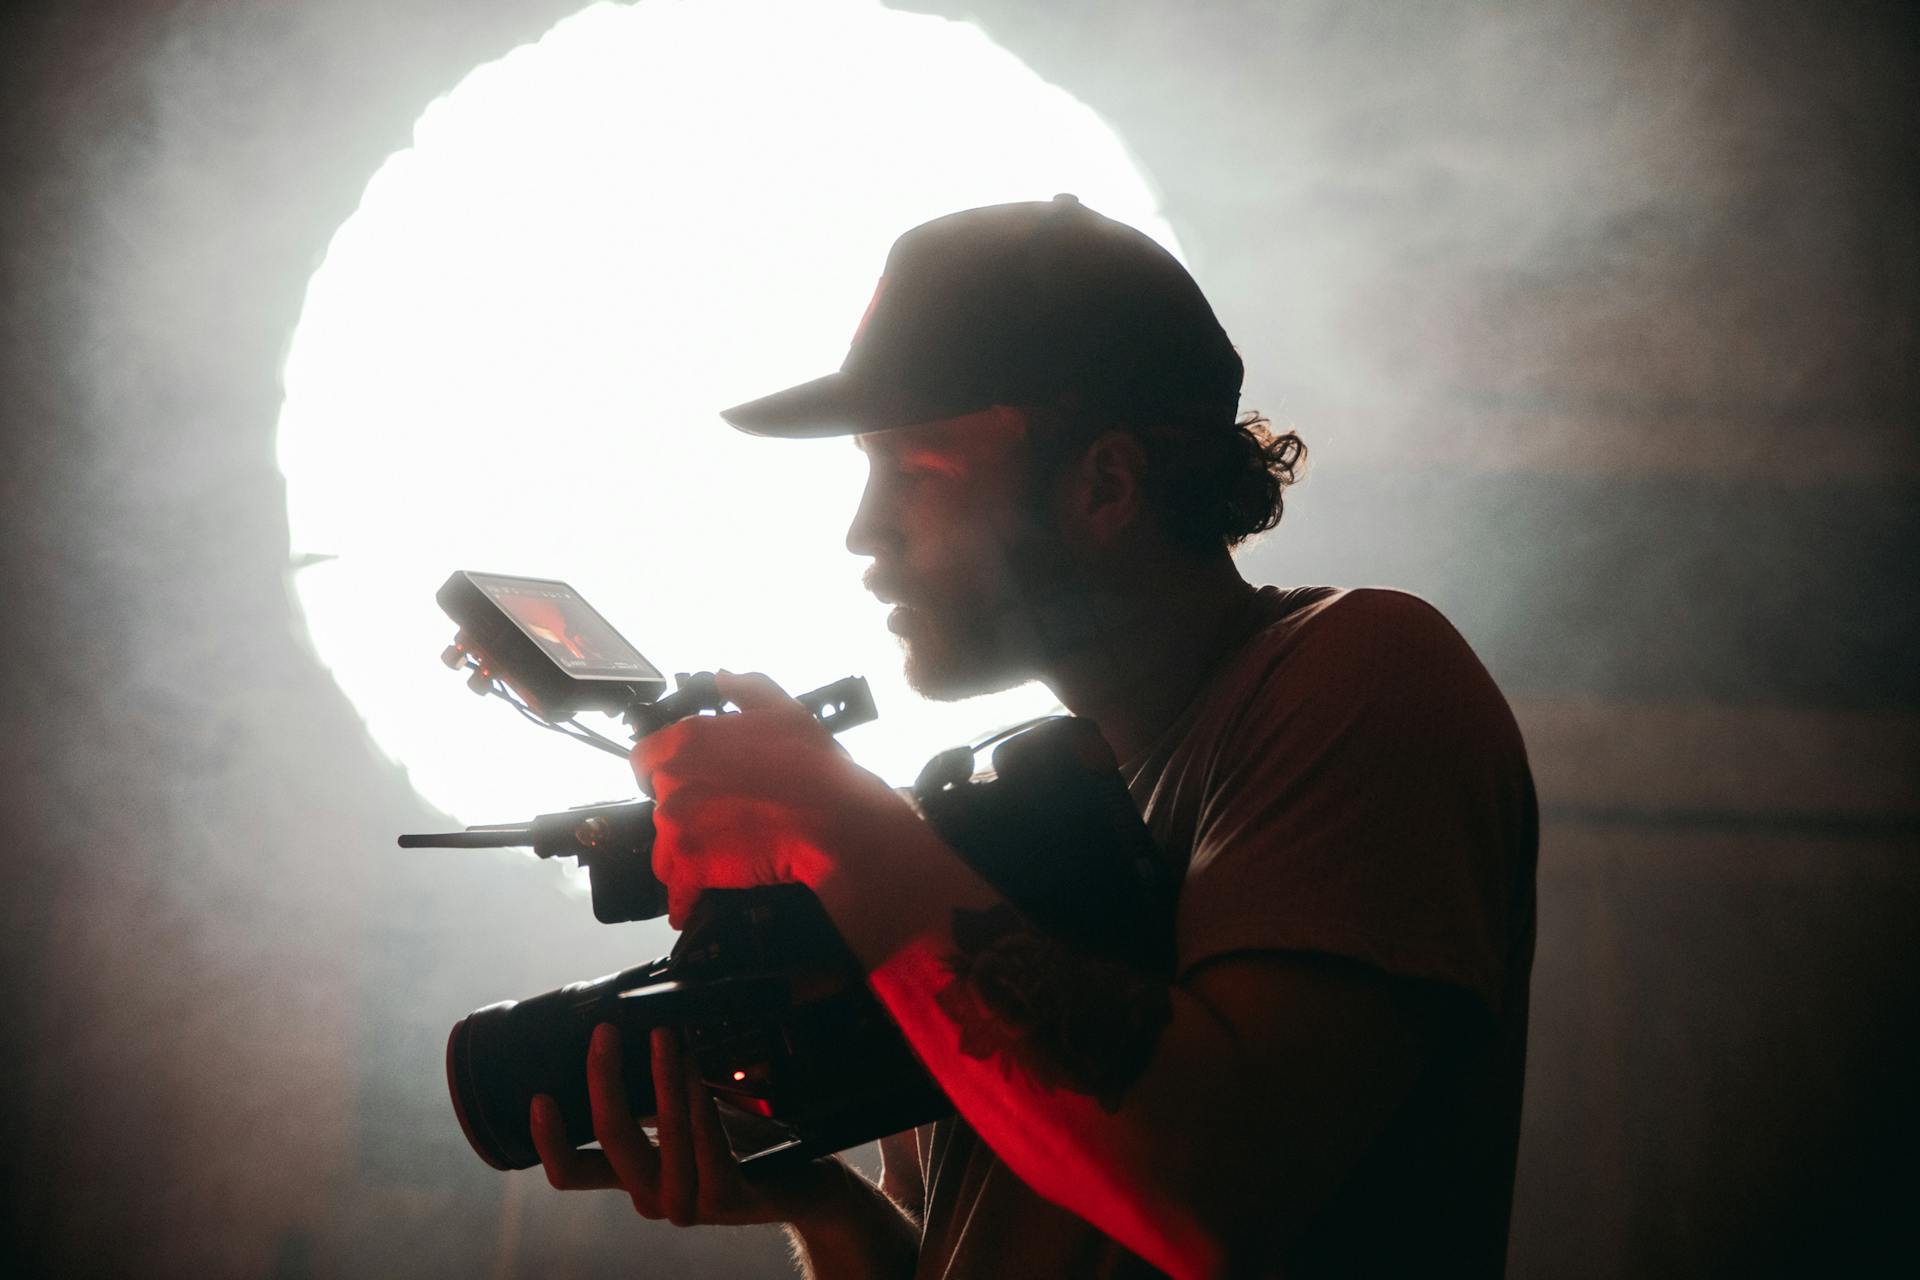 Man wearing a cap is focused on a camera while filming. He is front lit in red with a bright white backlight.